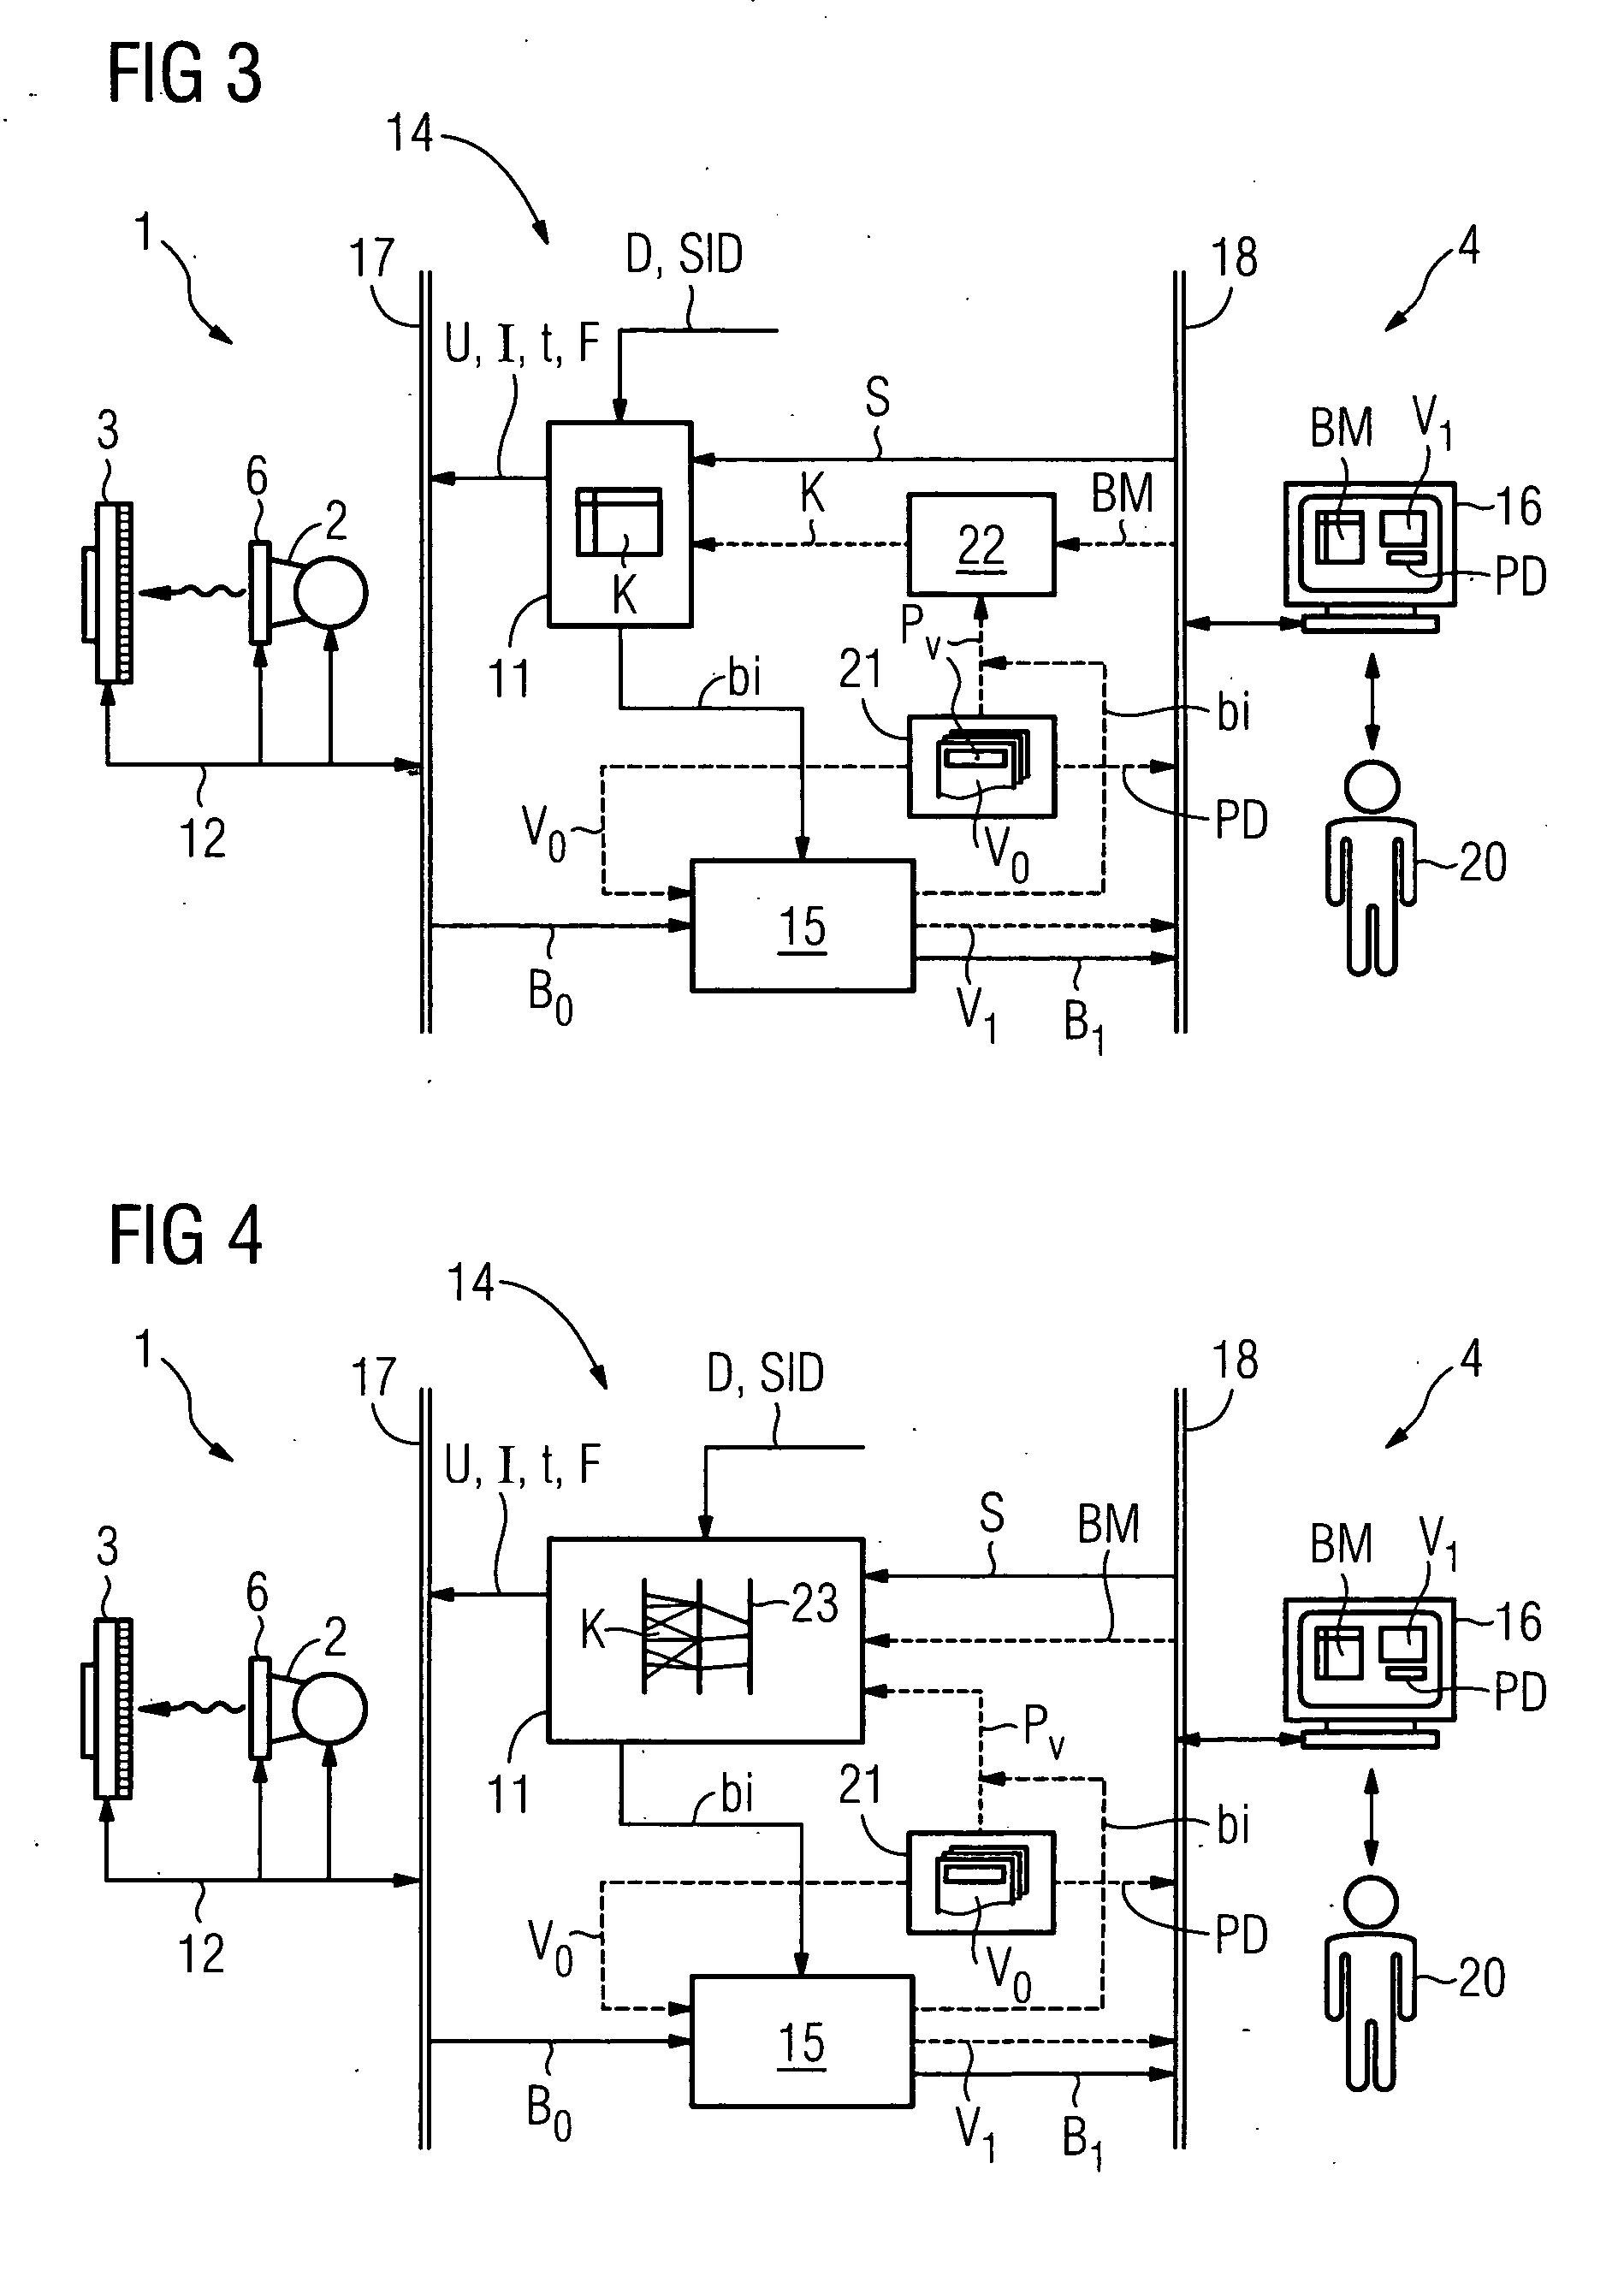 Method and device for user-specific parameterization of an x-ray device